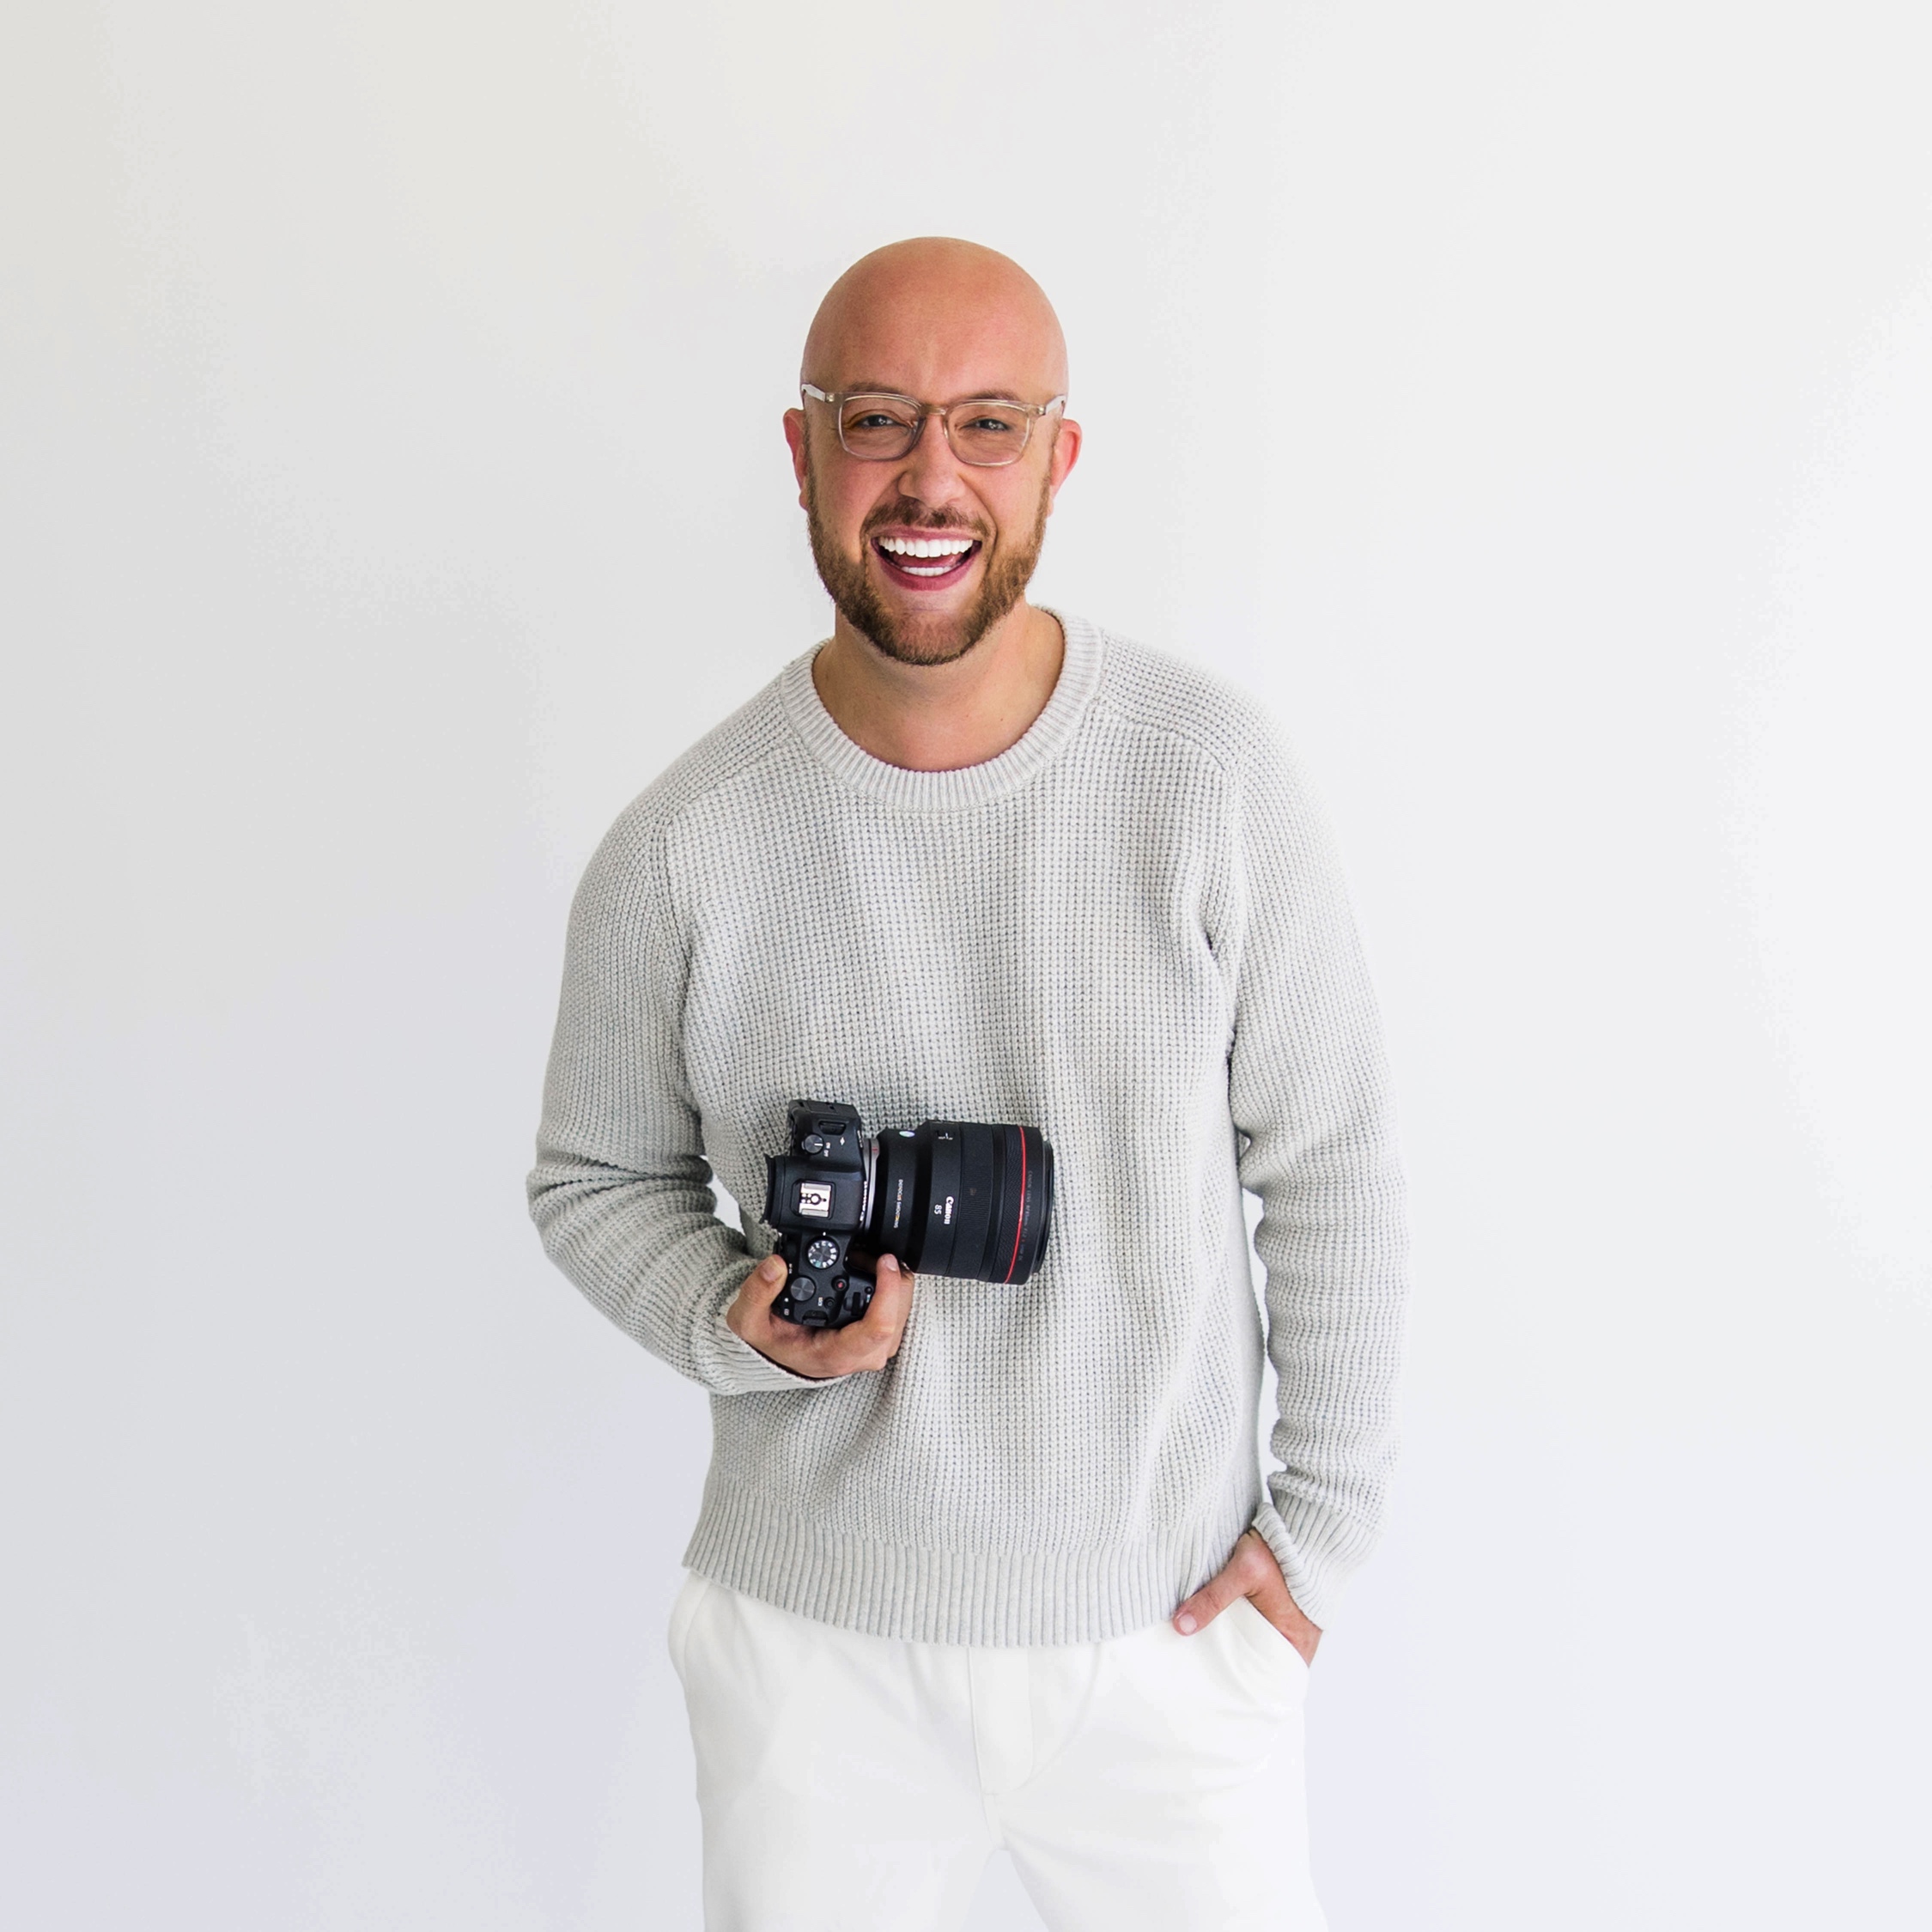 rob from square 8 studios stands holding a camera and smiling in front of a white background